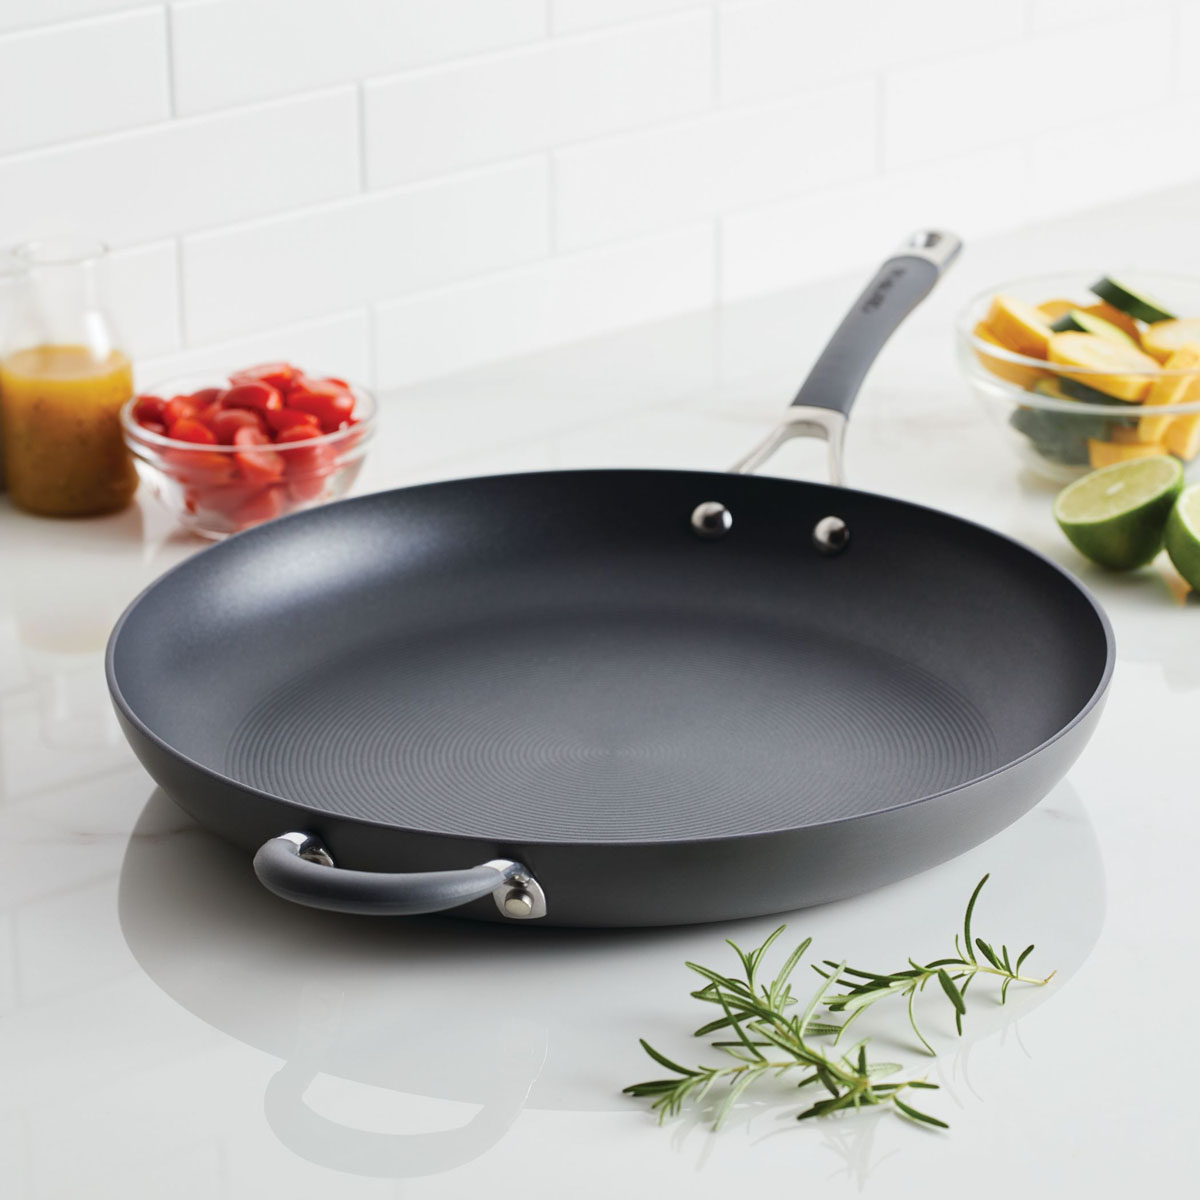 Circulon(R) Radiance 14in. Hard-Anodized Non-Stick Frying Pan